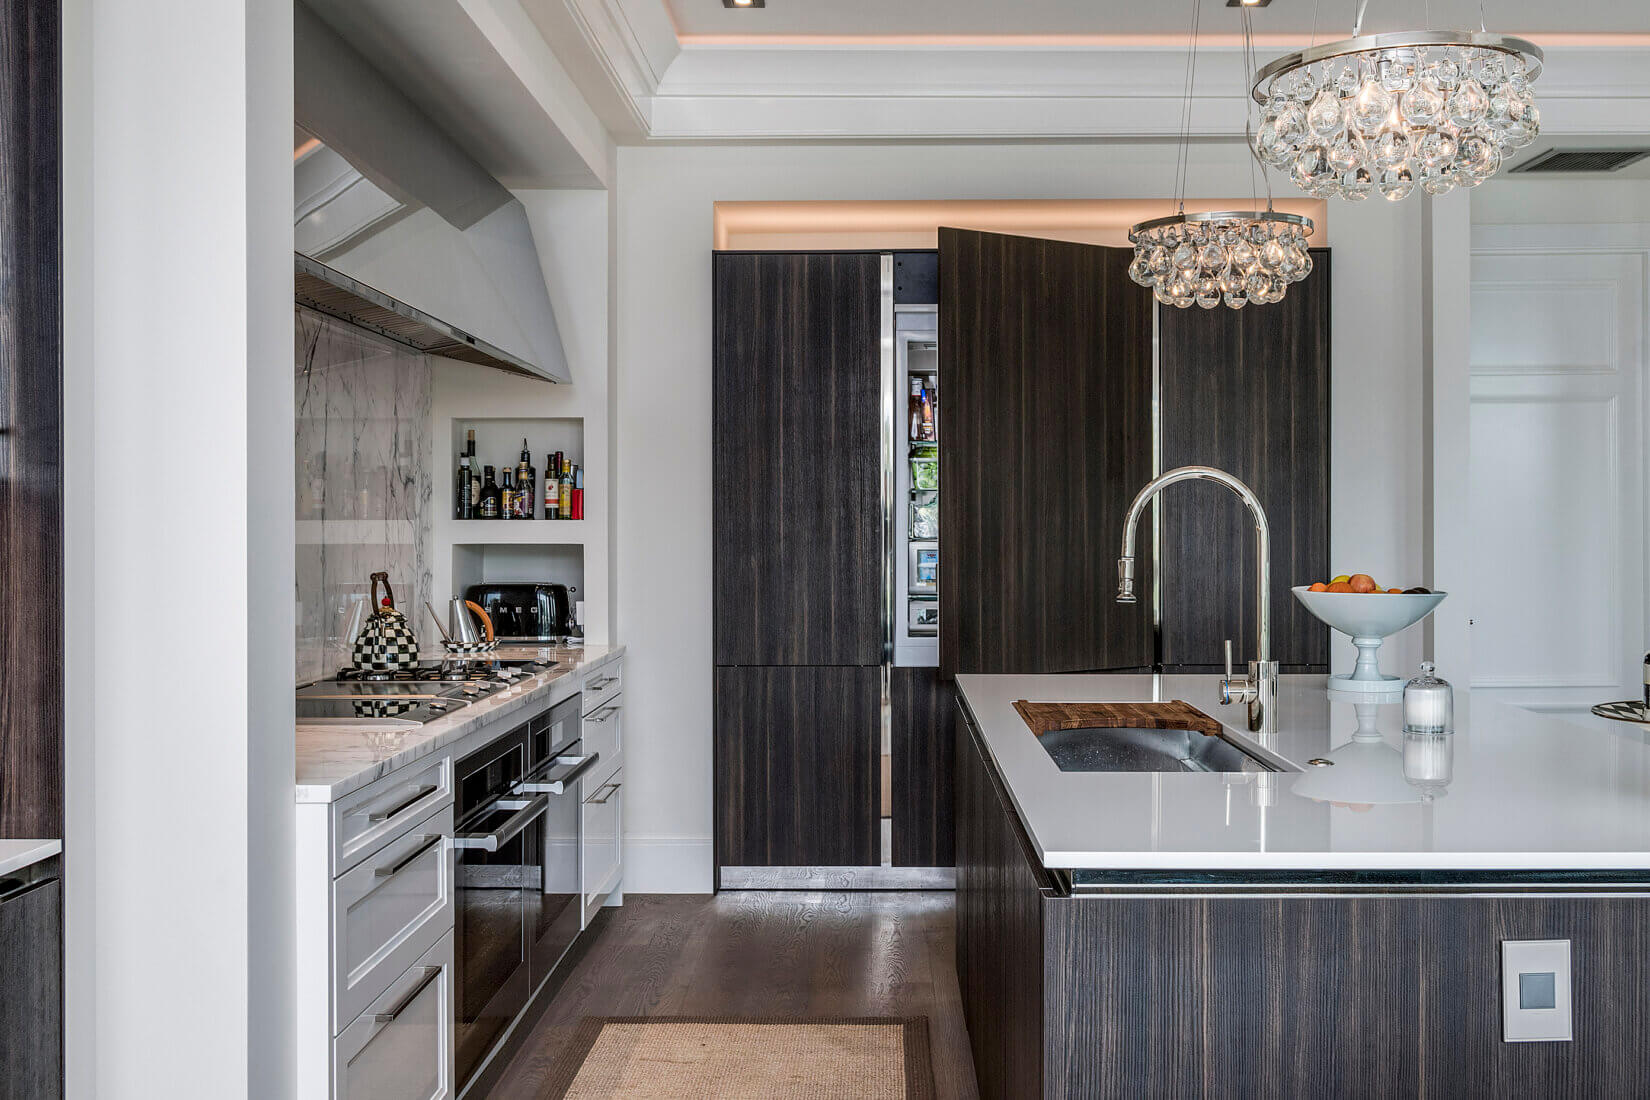 Luxury kitchen with dark-wood cabinetry and built-in refrigerator